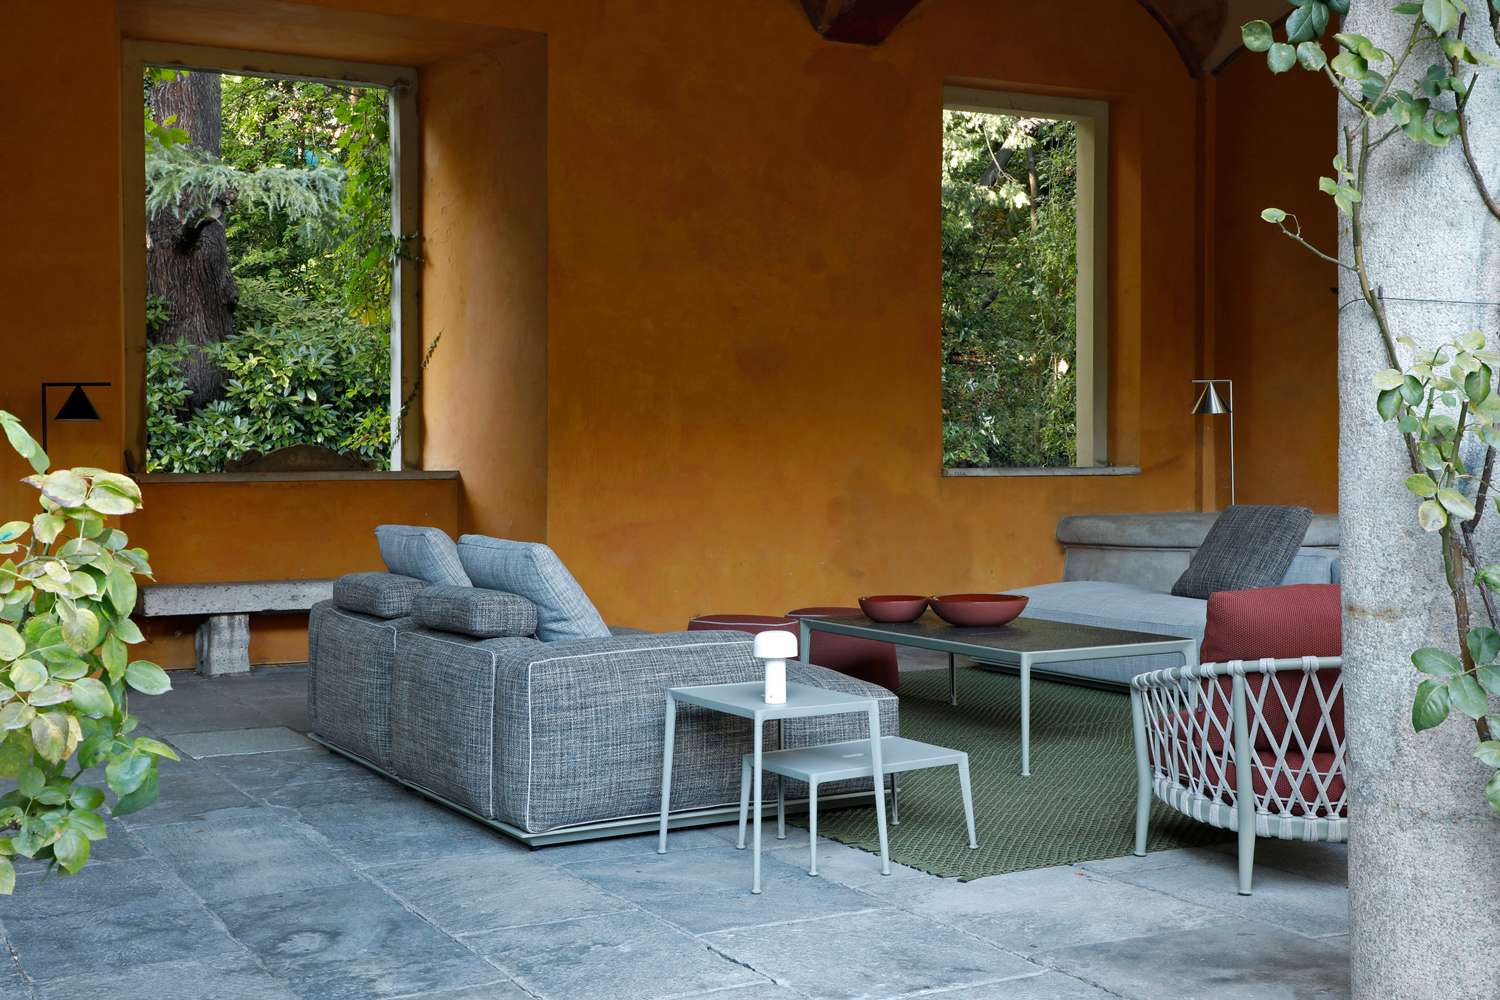 New 2020 B&B Italia Outdoor Collection - Gallery